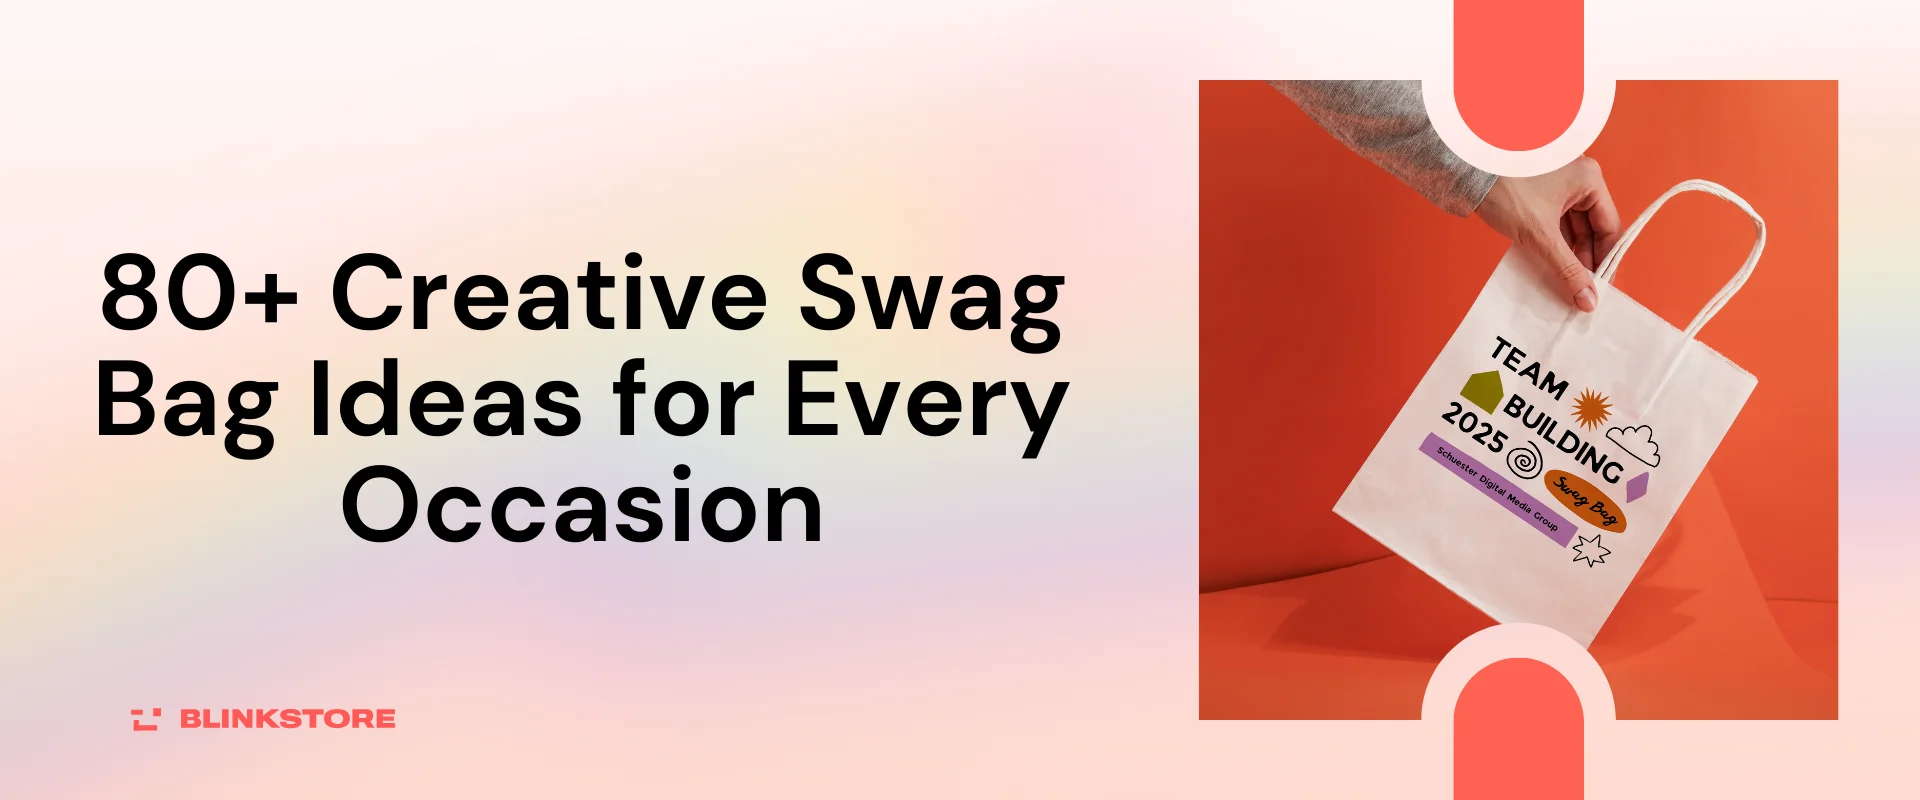 80+ Creative Swag Bag Ideas for Every Occasion